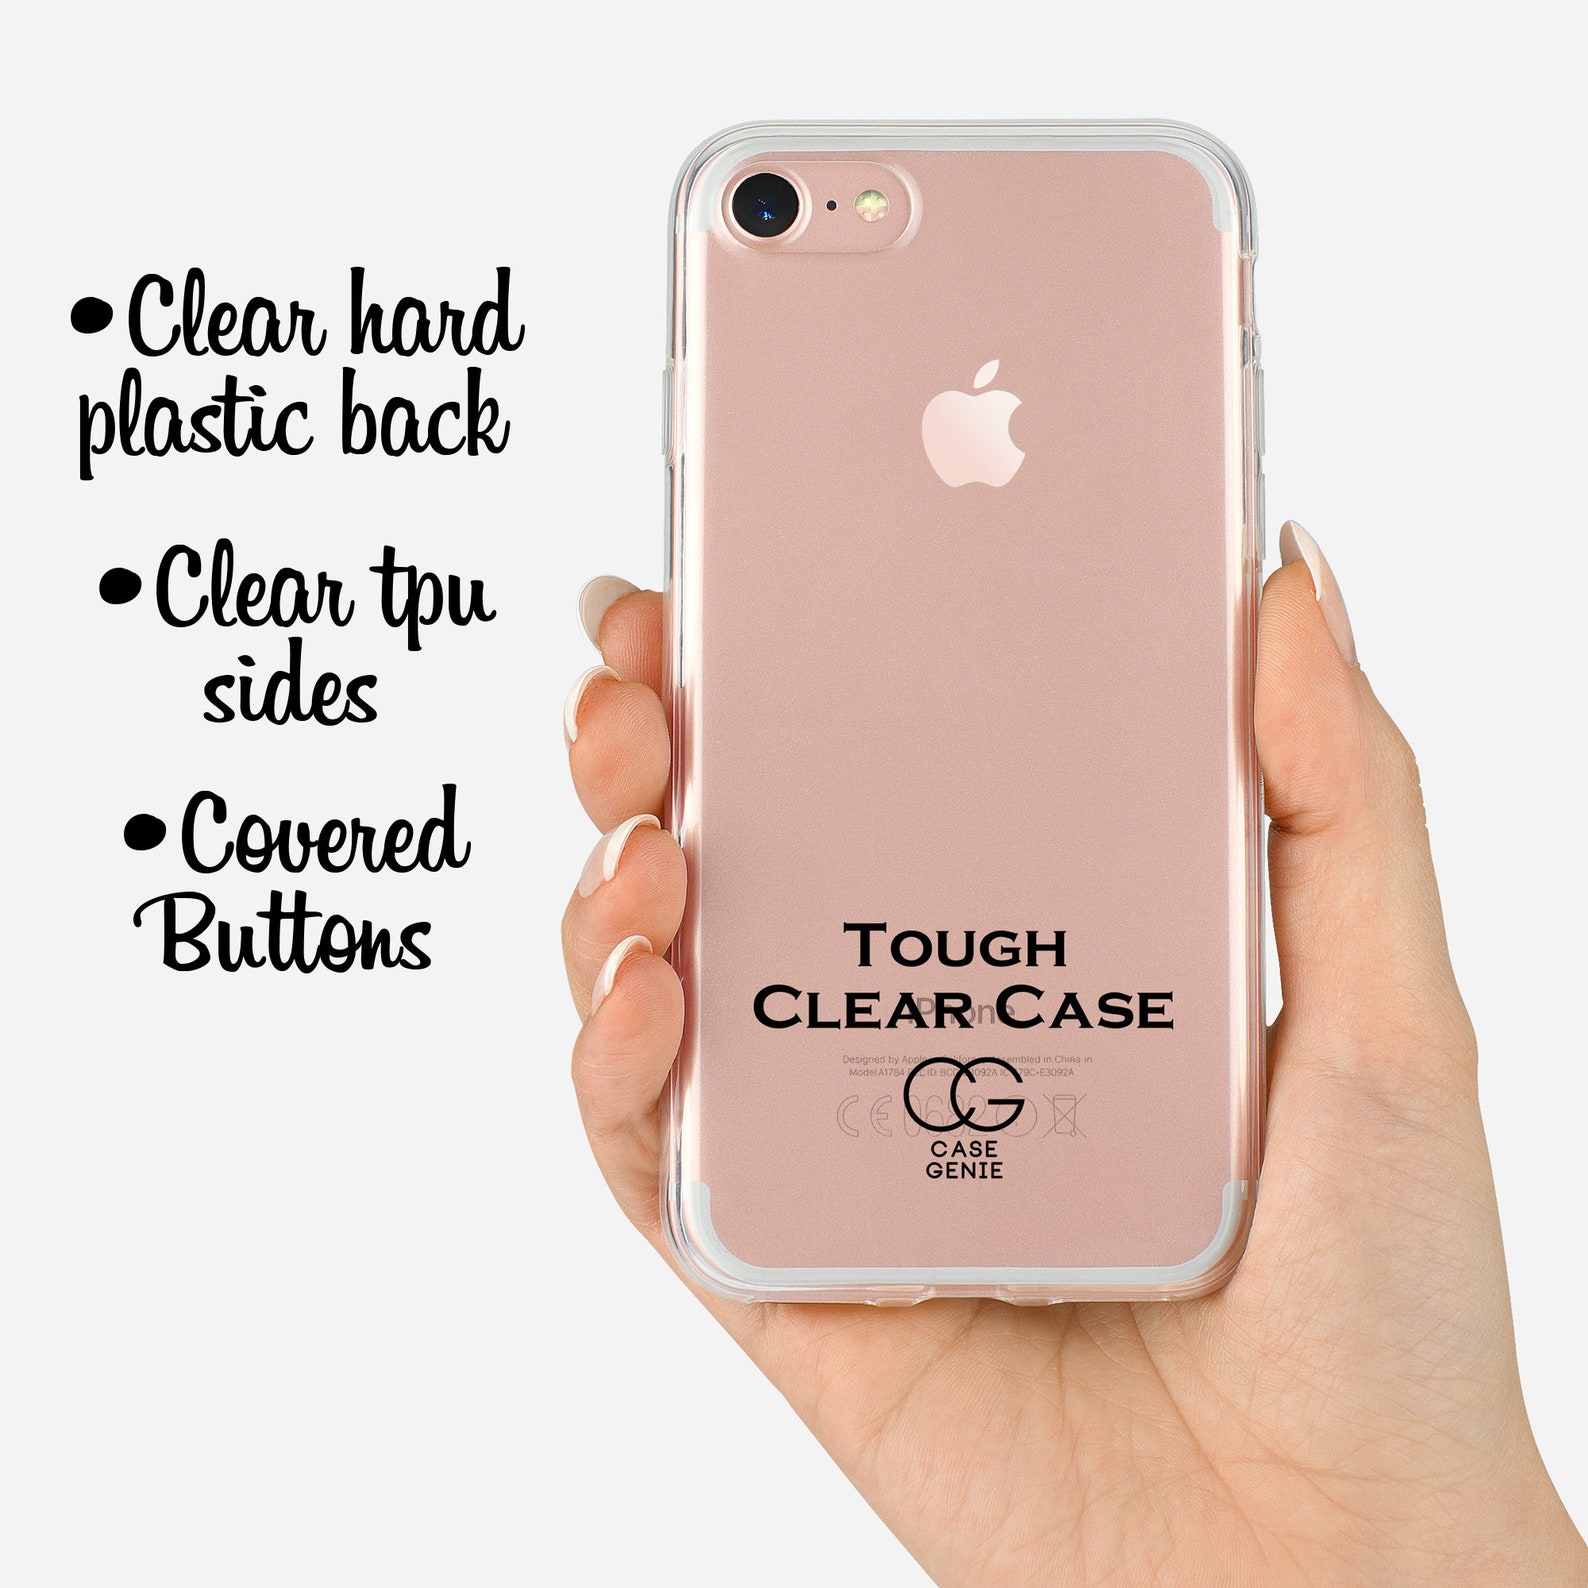 ballet shoes clear phone case for iphone x xs xr max 8 plus 7 6 6s 5 5s se cell cover tpu hybrid tough bumper ballerina